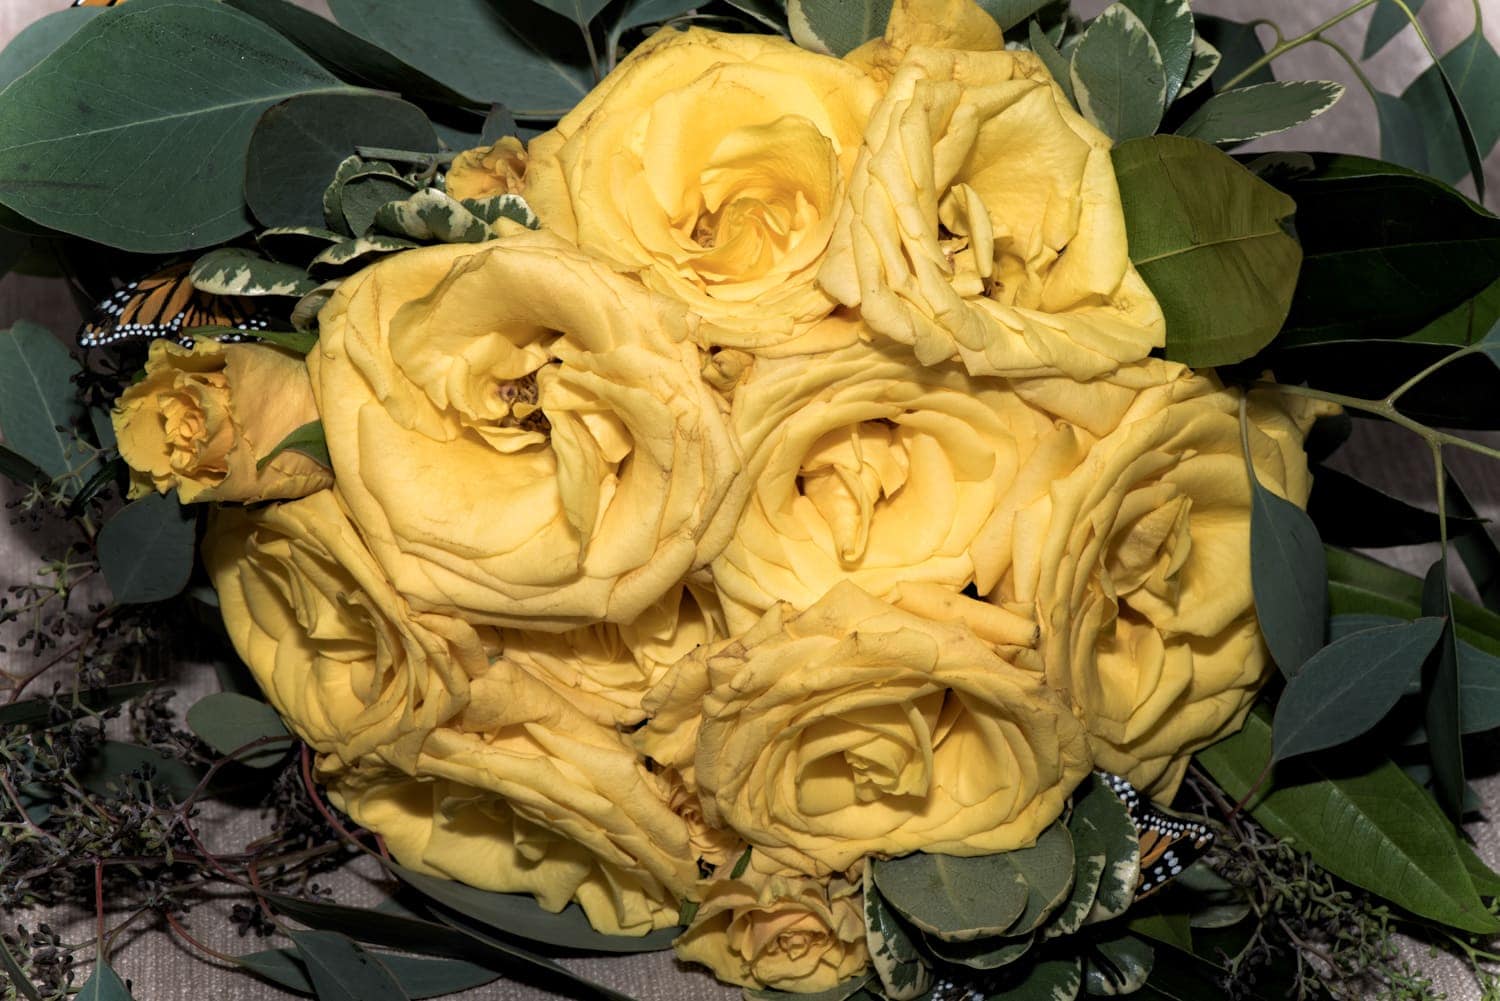 A wedding bridal bouquet with yellow roses and accented with butterflies.